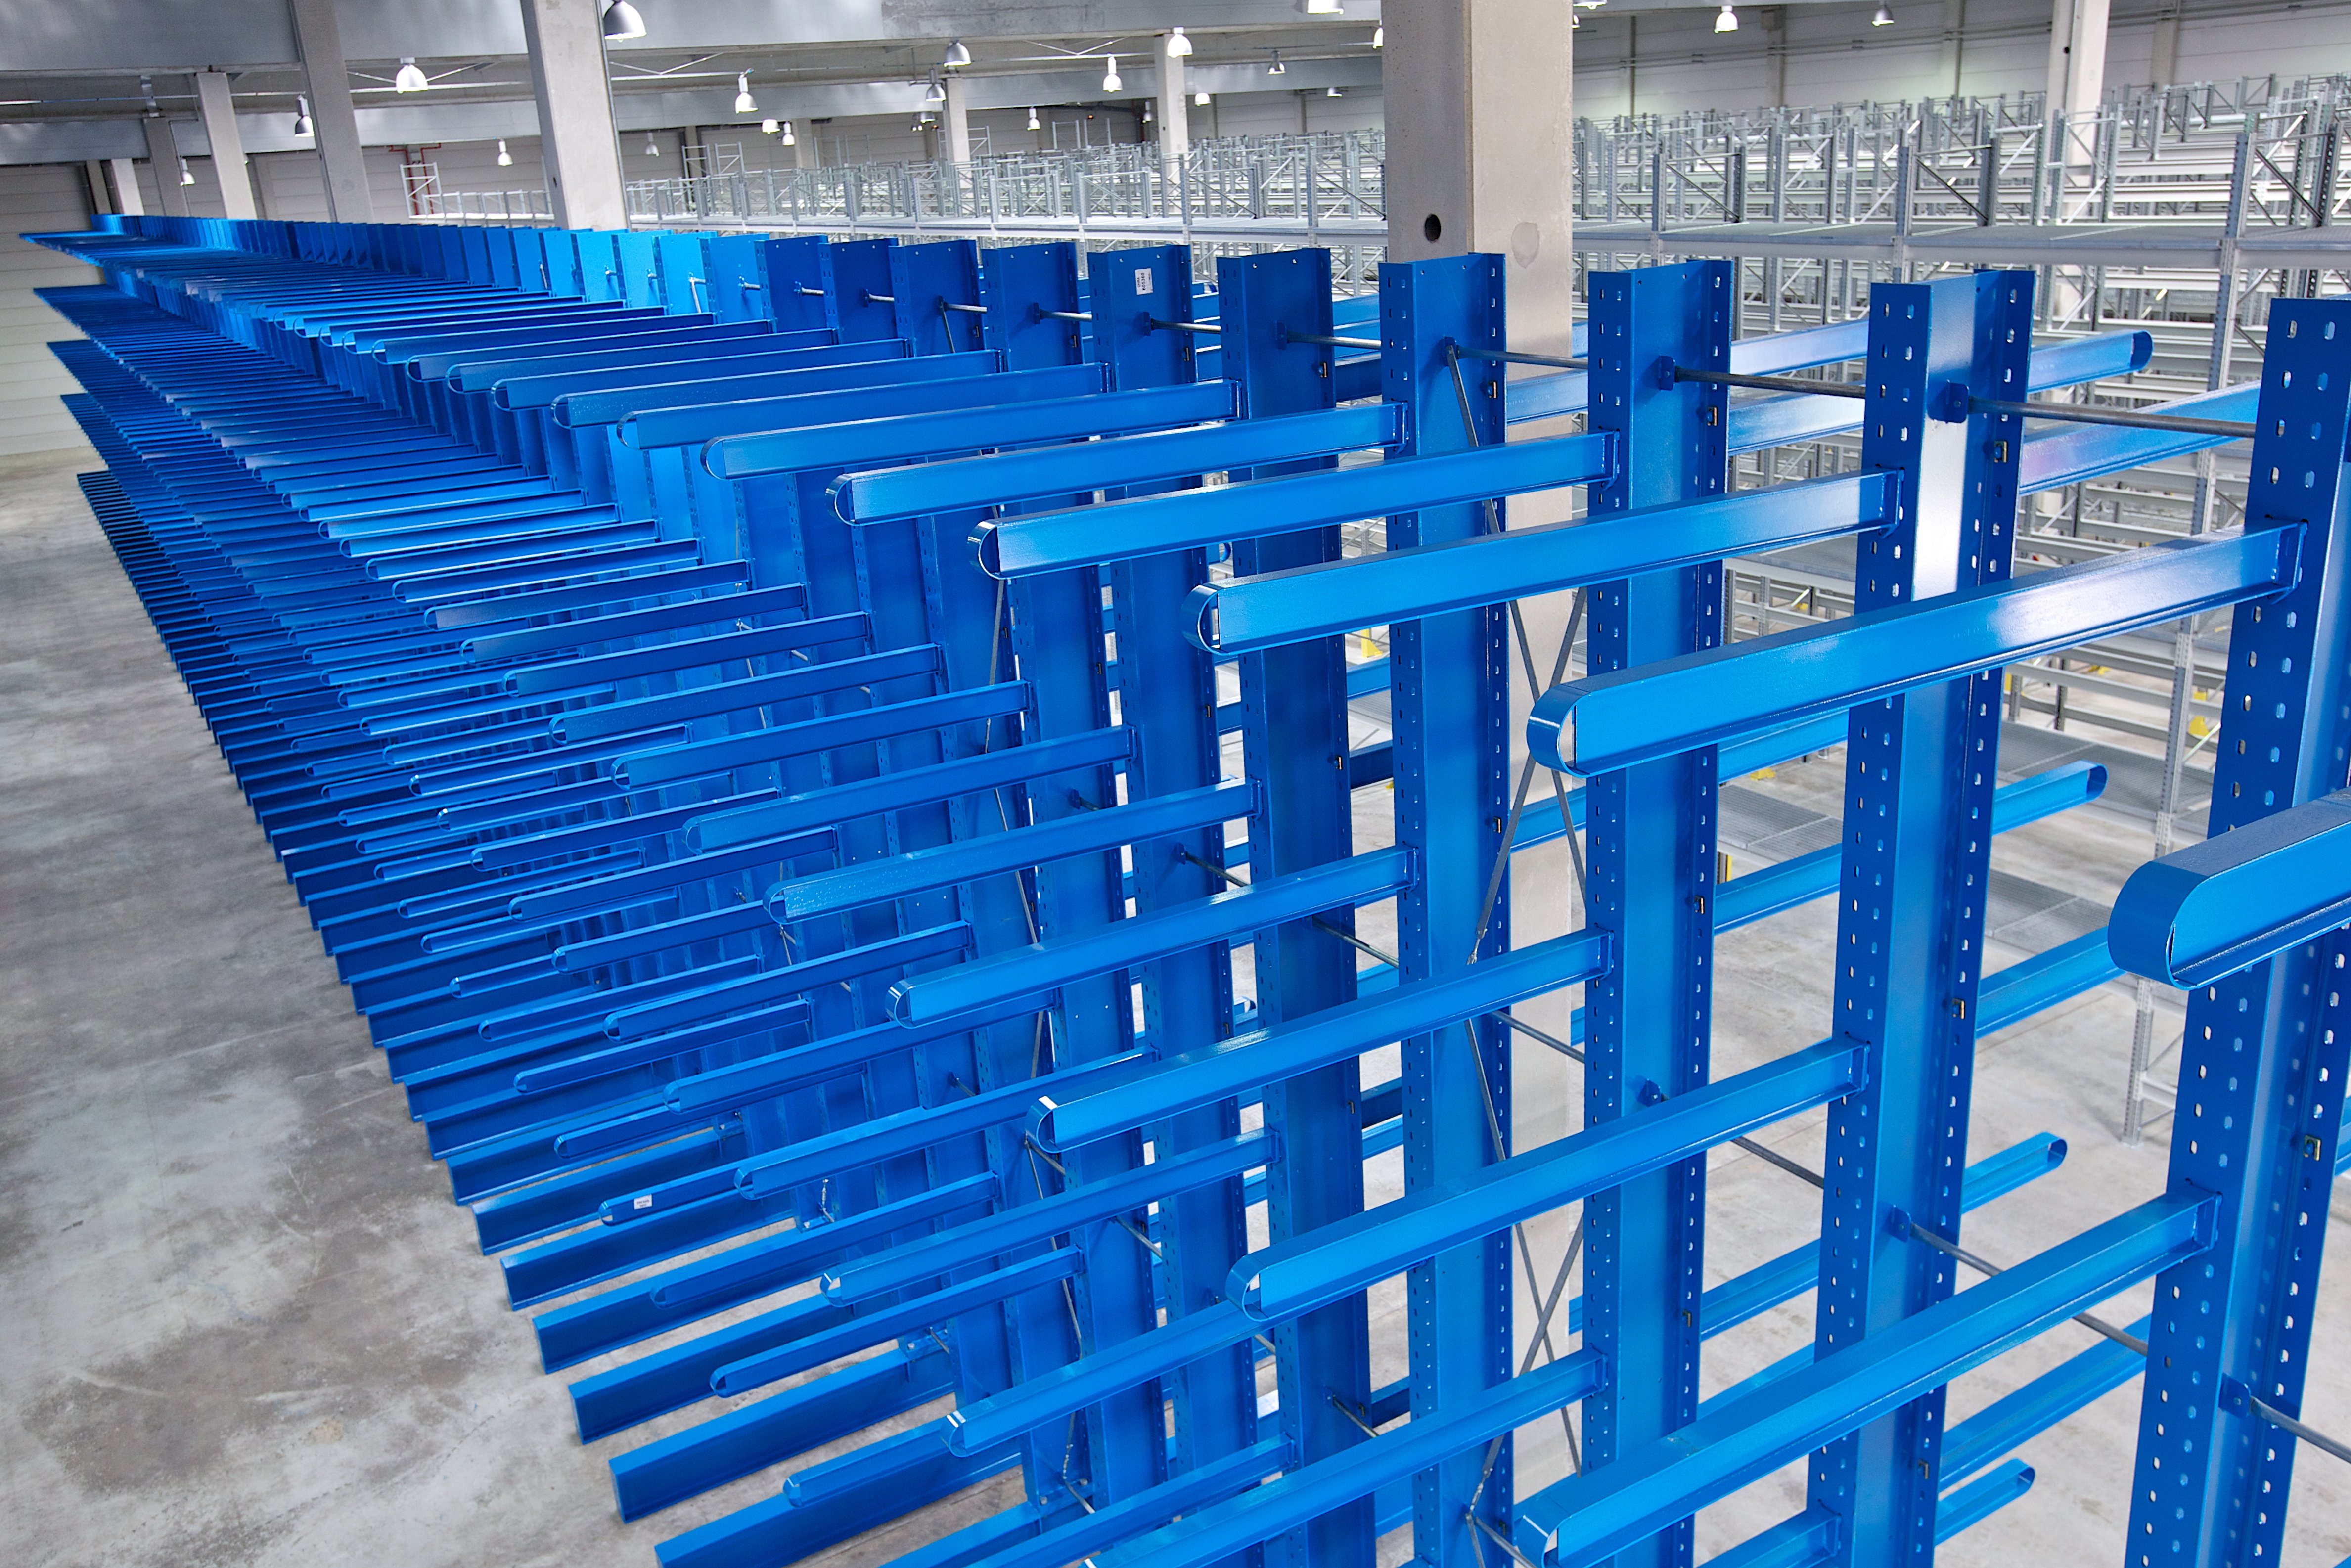 [Translate "Poland"] Cantilever racking system by OHRA